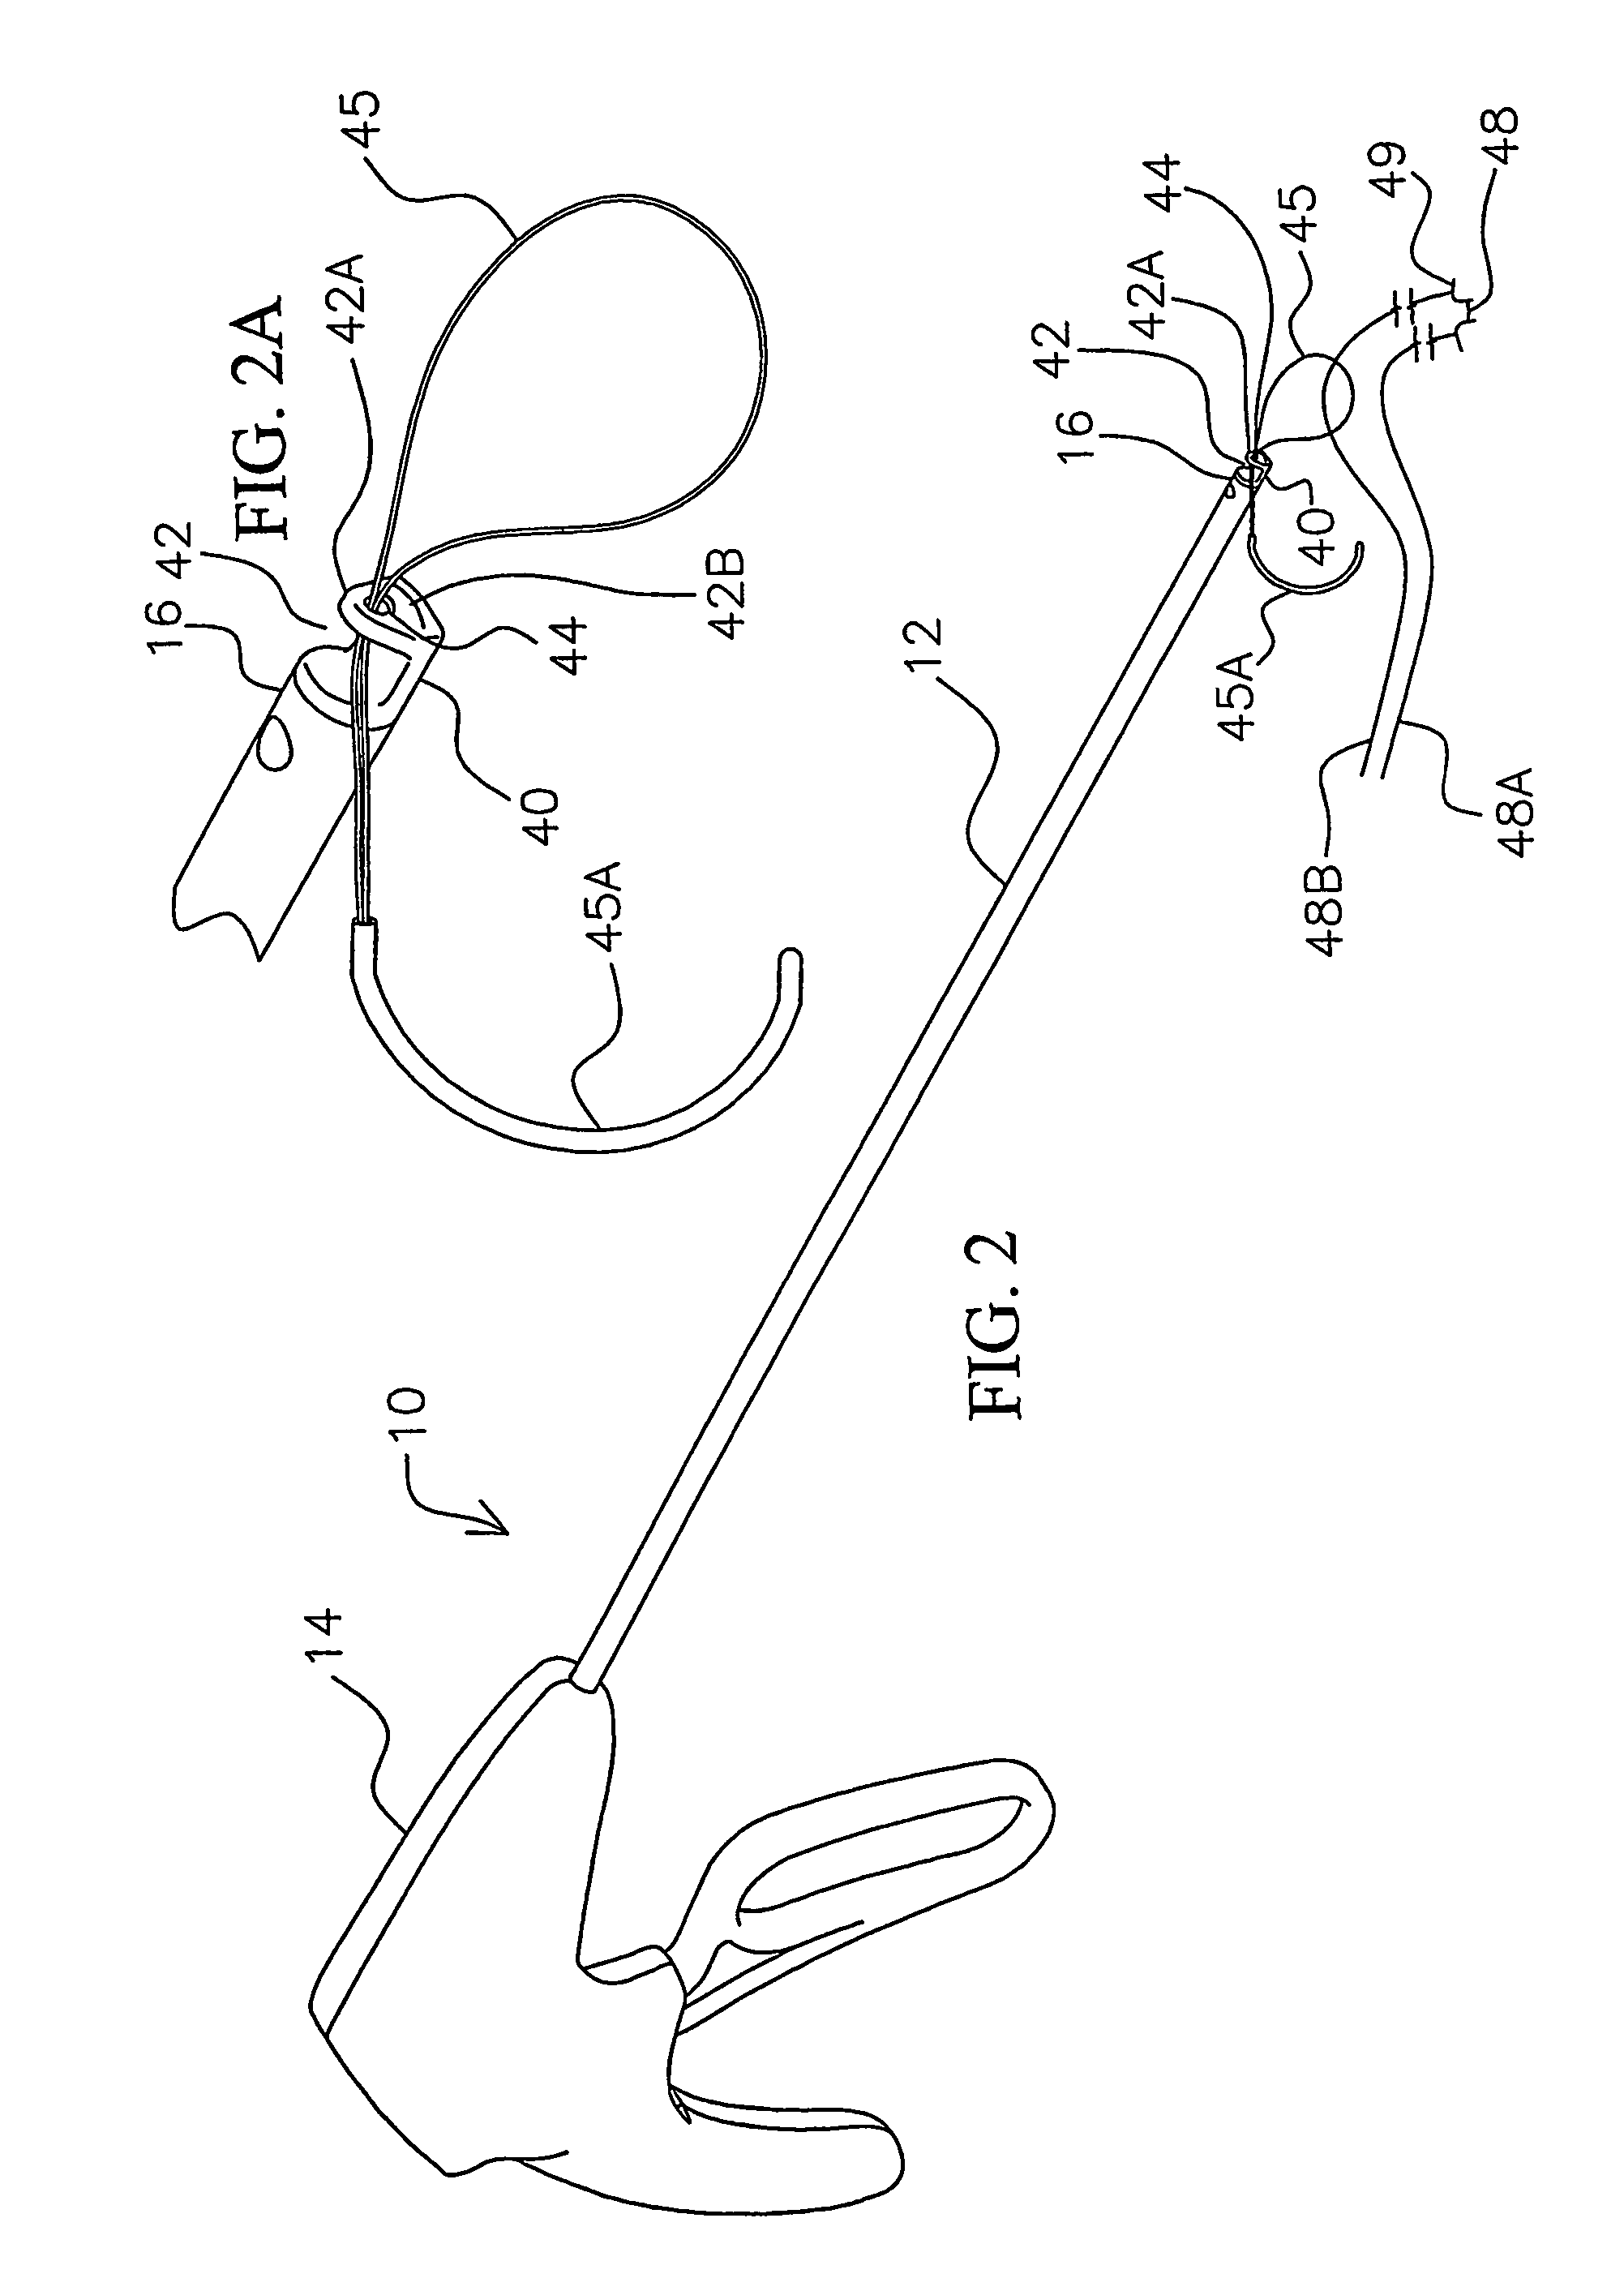 Instrument for assisting in the remote placement of tied surgical knots and trimming of suture away from the knot and method of use